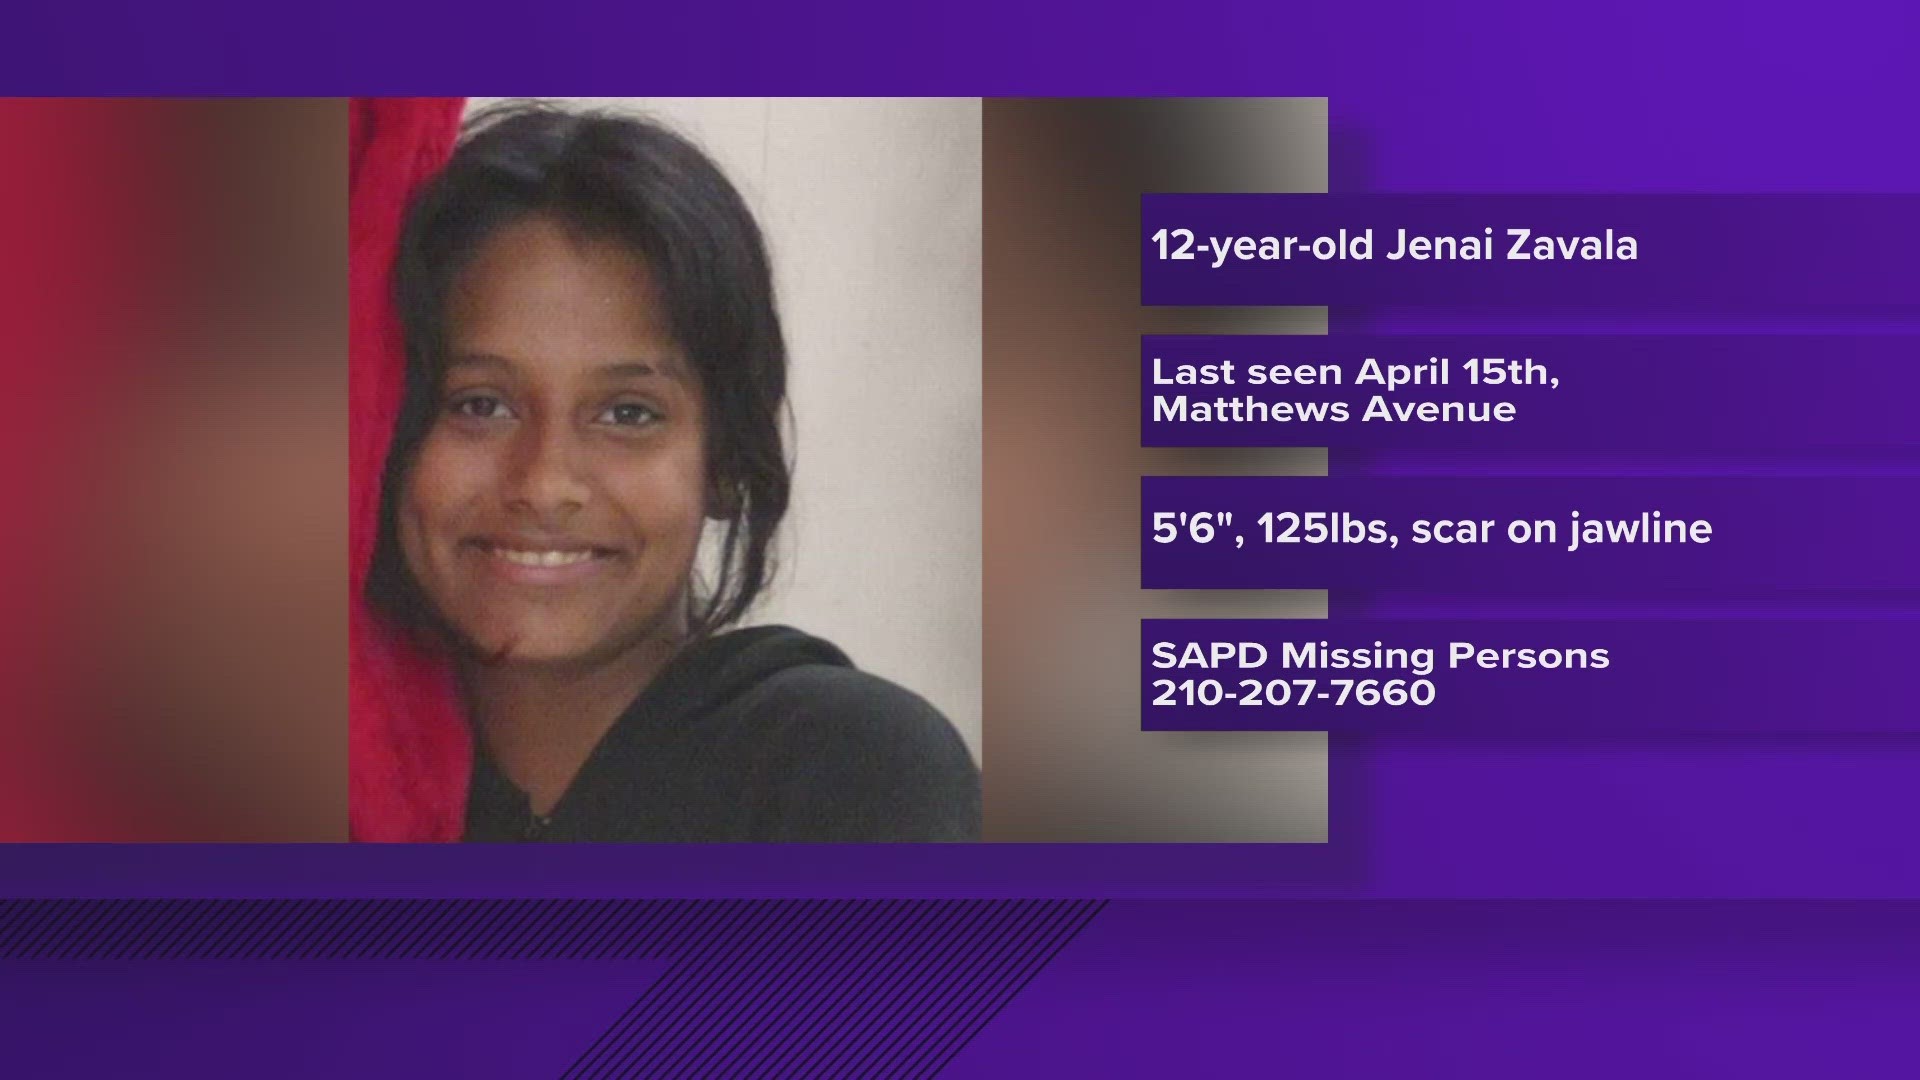 Officials say Jenai Zavala was last seen in the 700 block of Matthews Avenue on April 16 at around 6 p.m.